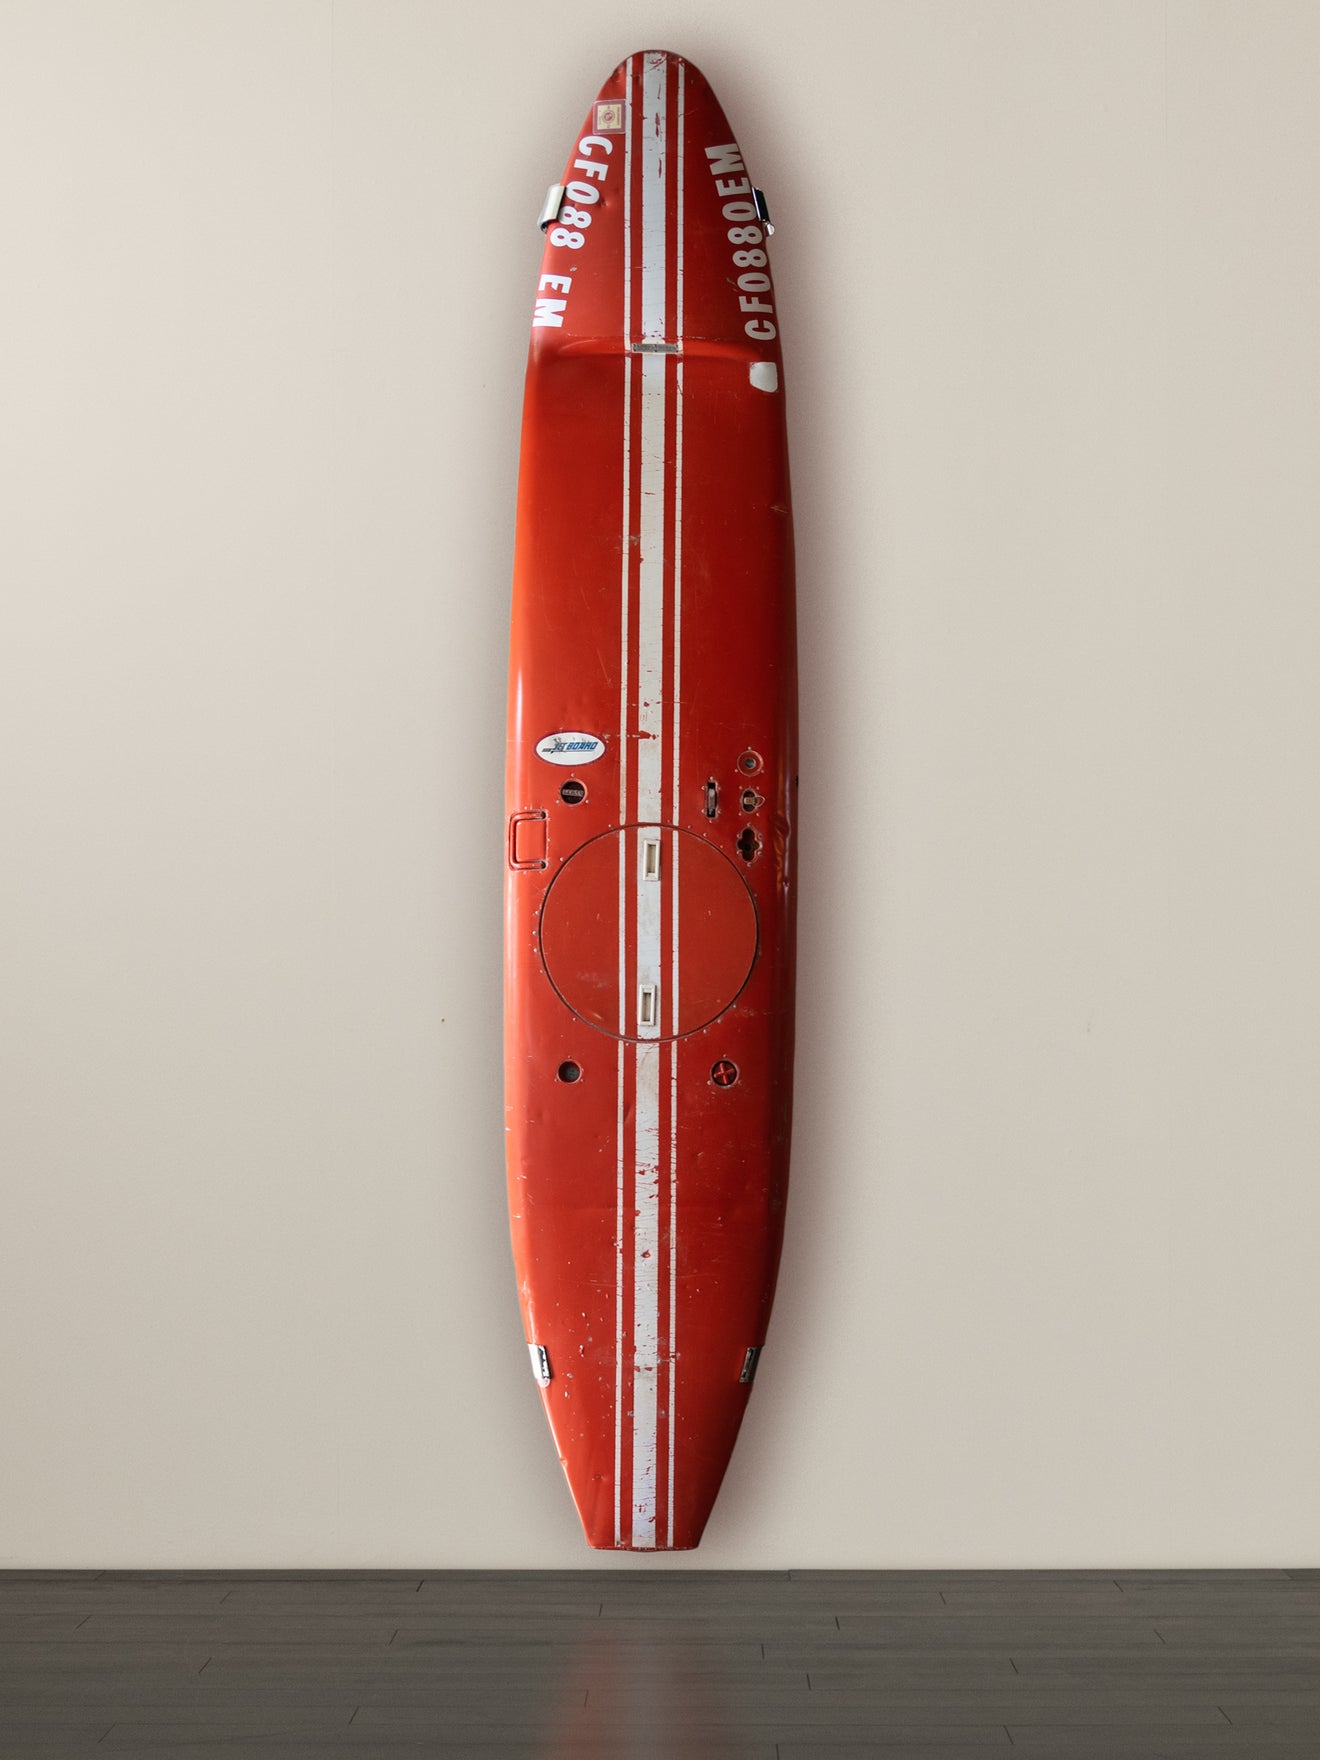 RED JETBOARD MOTORIZED SURFBOARD BY SARGENT FLETCHER CO